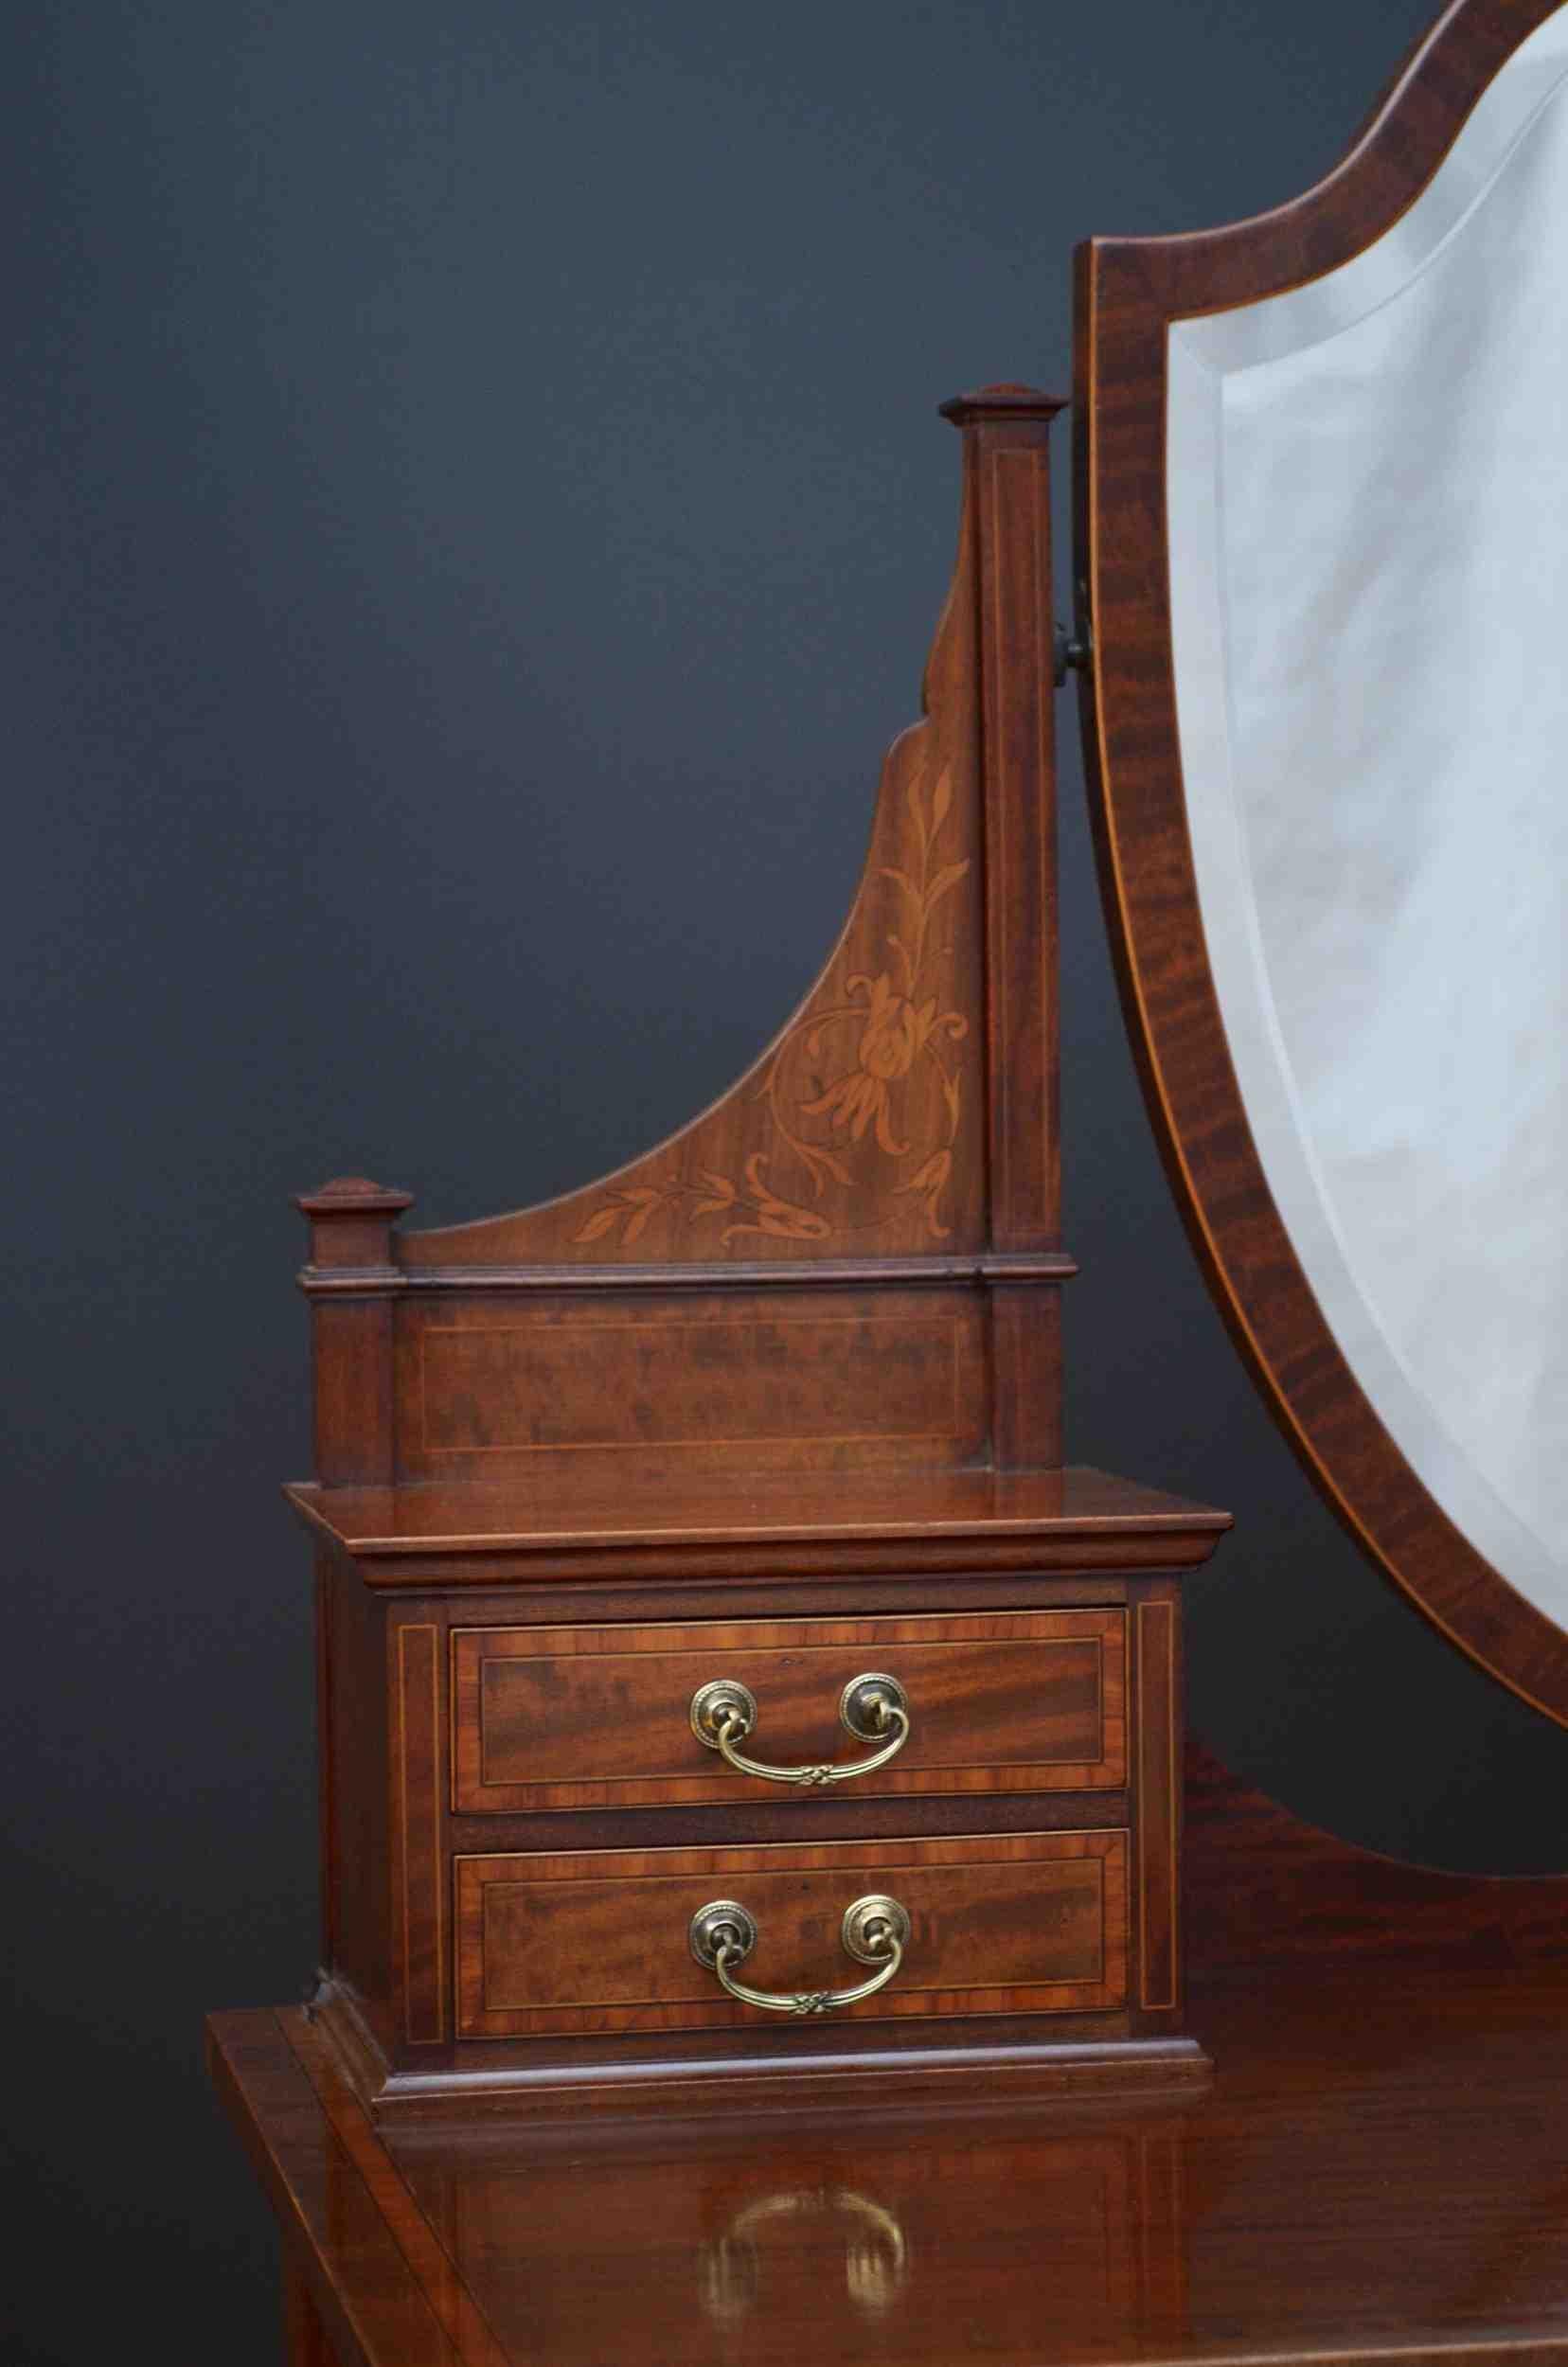 J09 Fine quality Edwardian mahogany and inlaid dressing table, having shield shaped mirror with original slightly foxed glass supported on inlaid uprights terminating in small inlaid drawers above satinwood crossbanded figured mahogany top and three